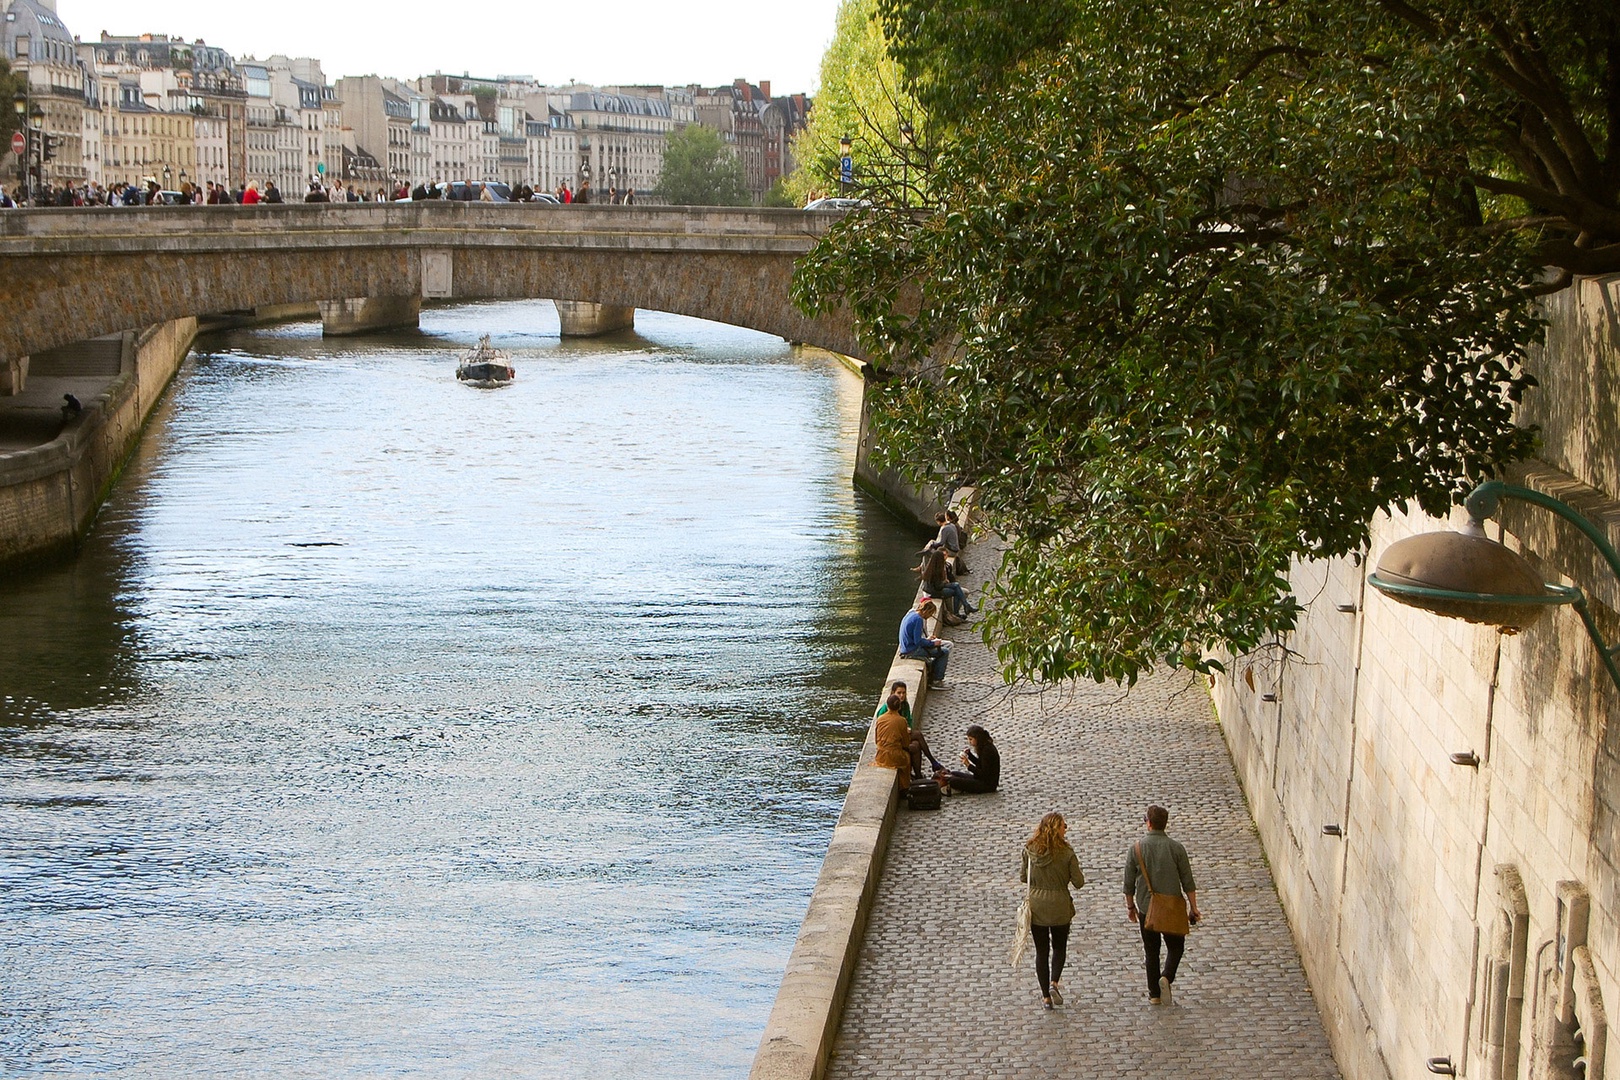 Stroll along the Seine and take in the Parisian sights.